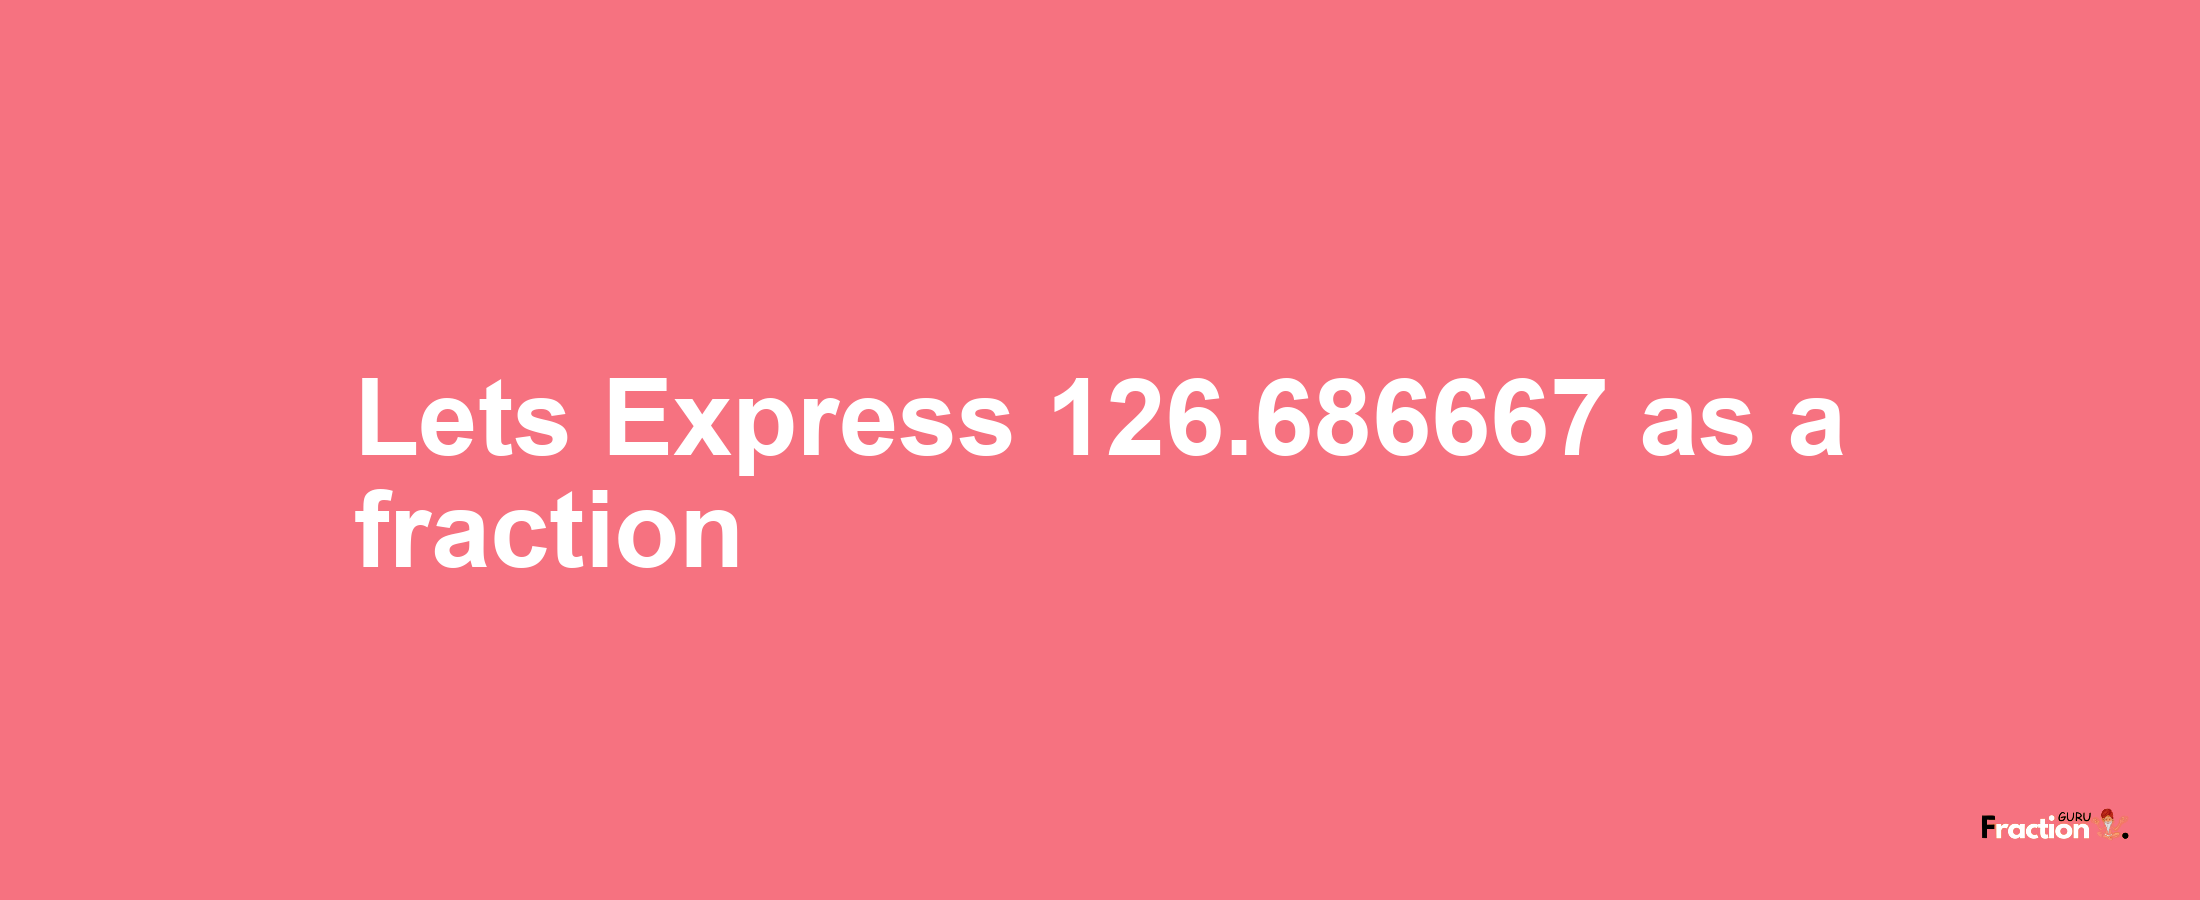 Lets Express 126.686667 as afraction